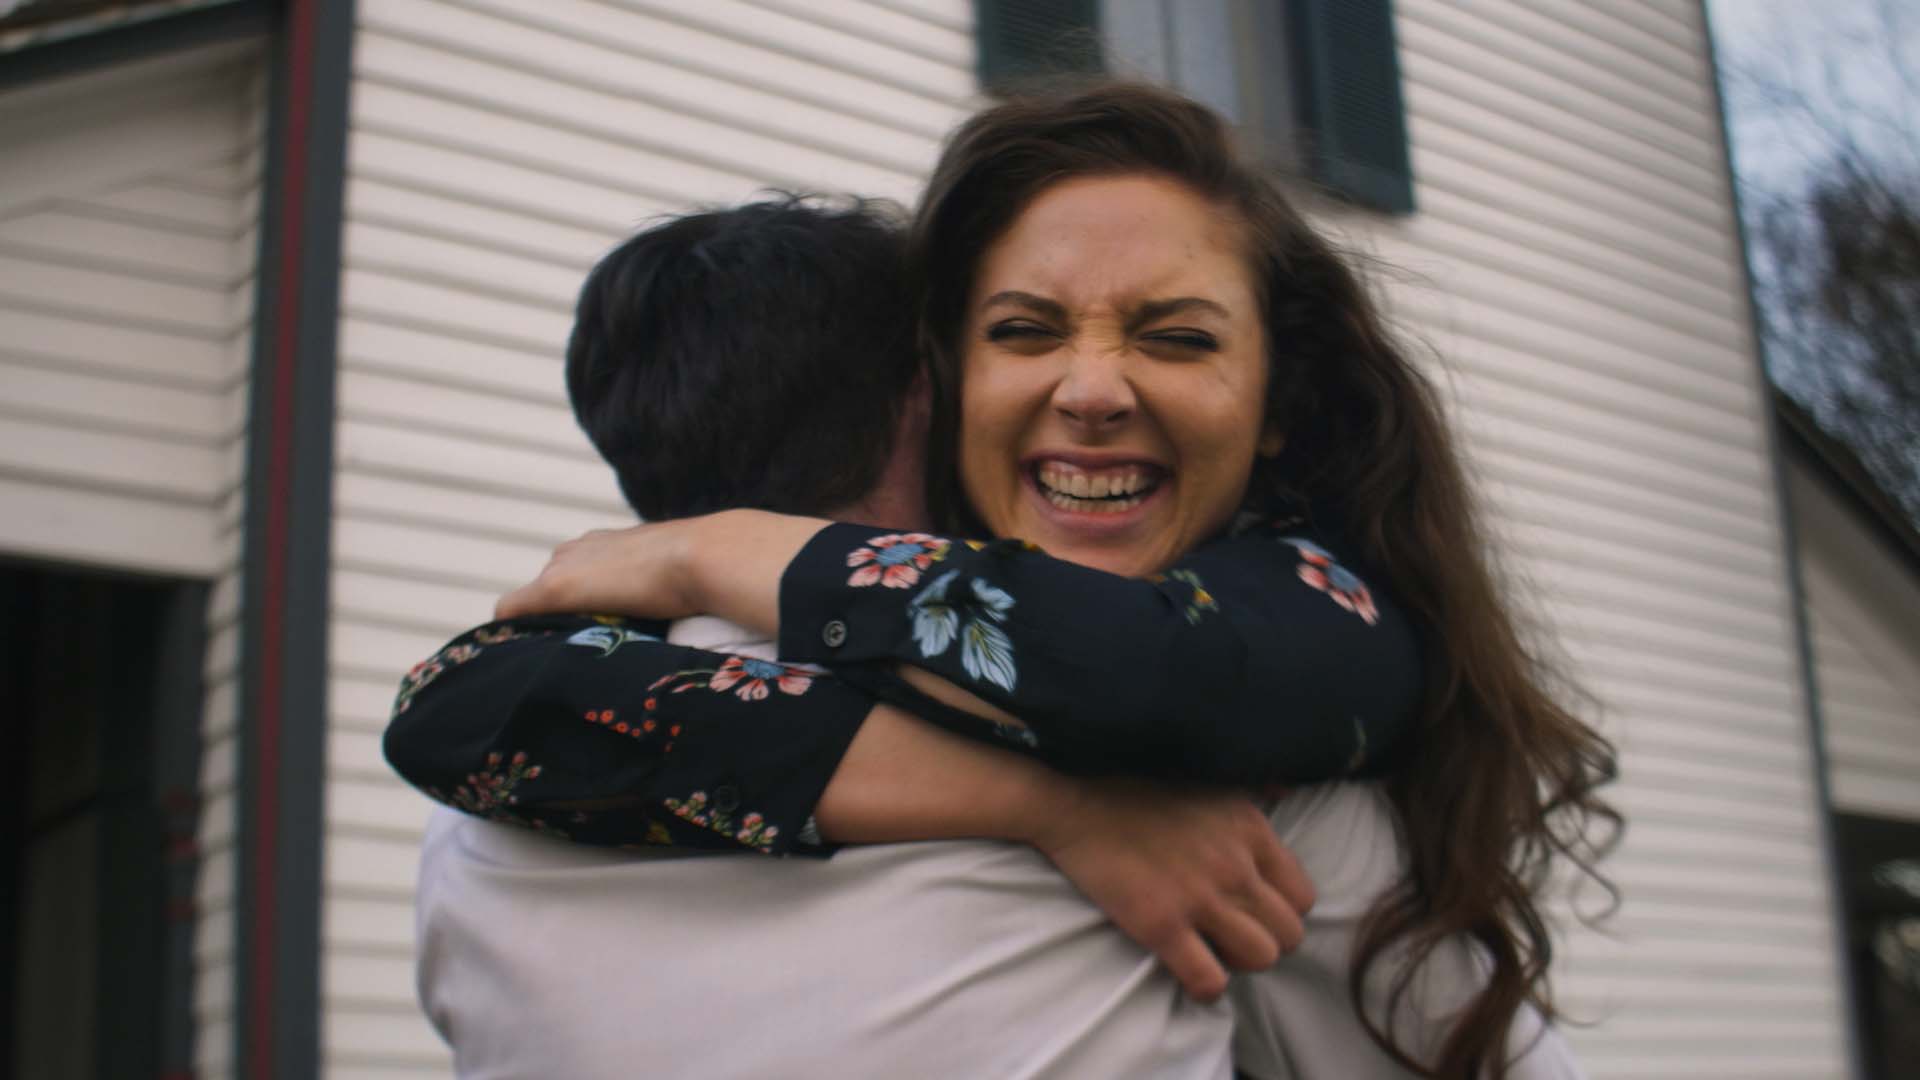 A woman embracing another human as seen in the “Delivering Hope” commercial